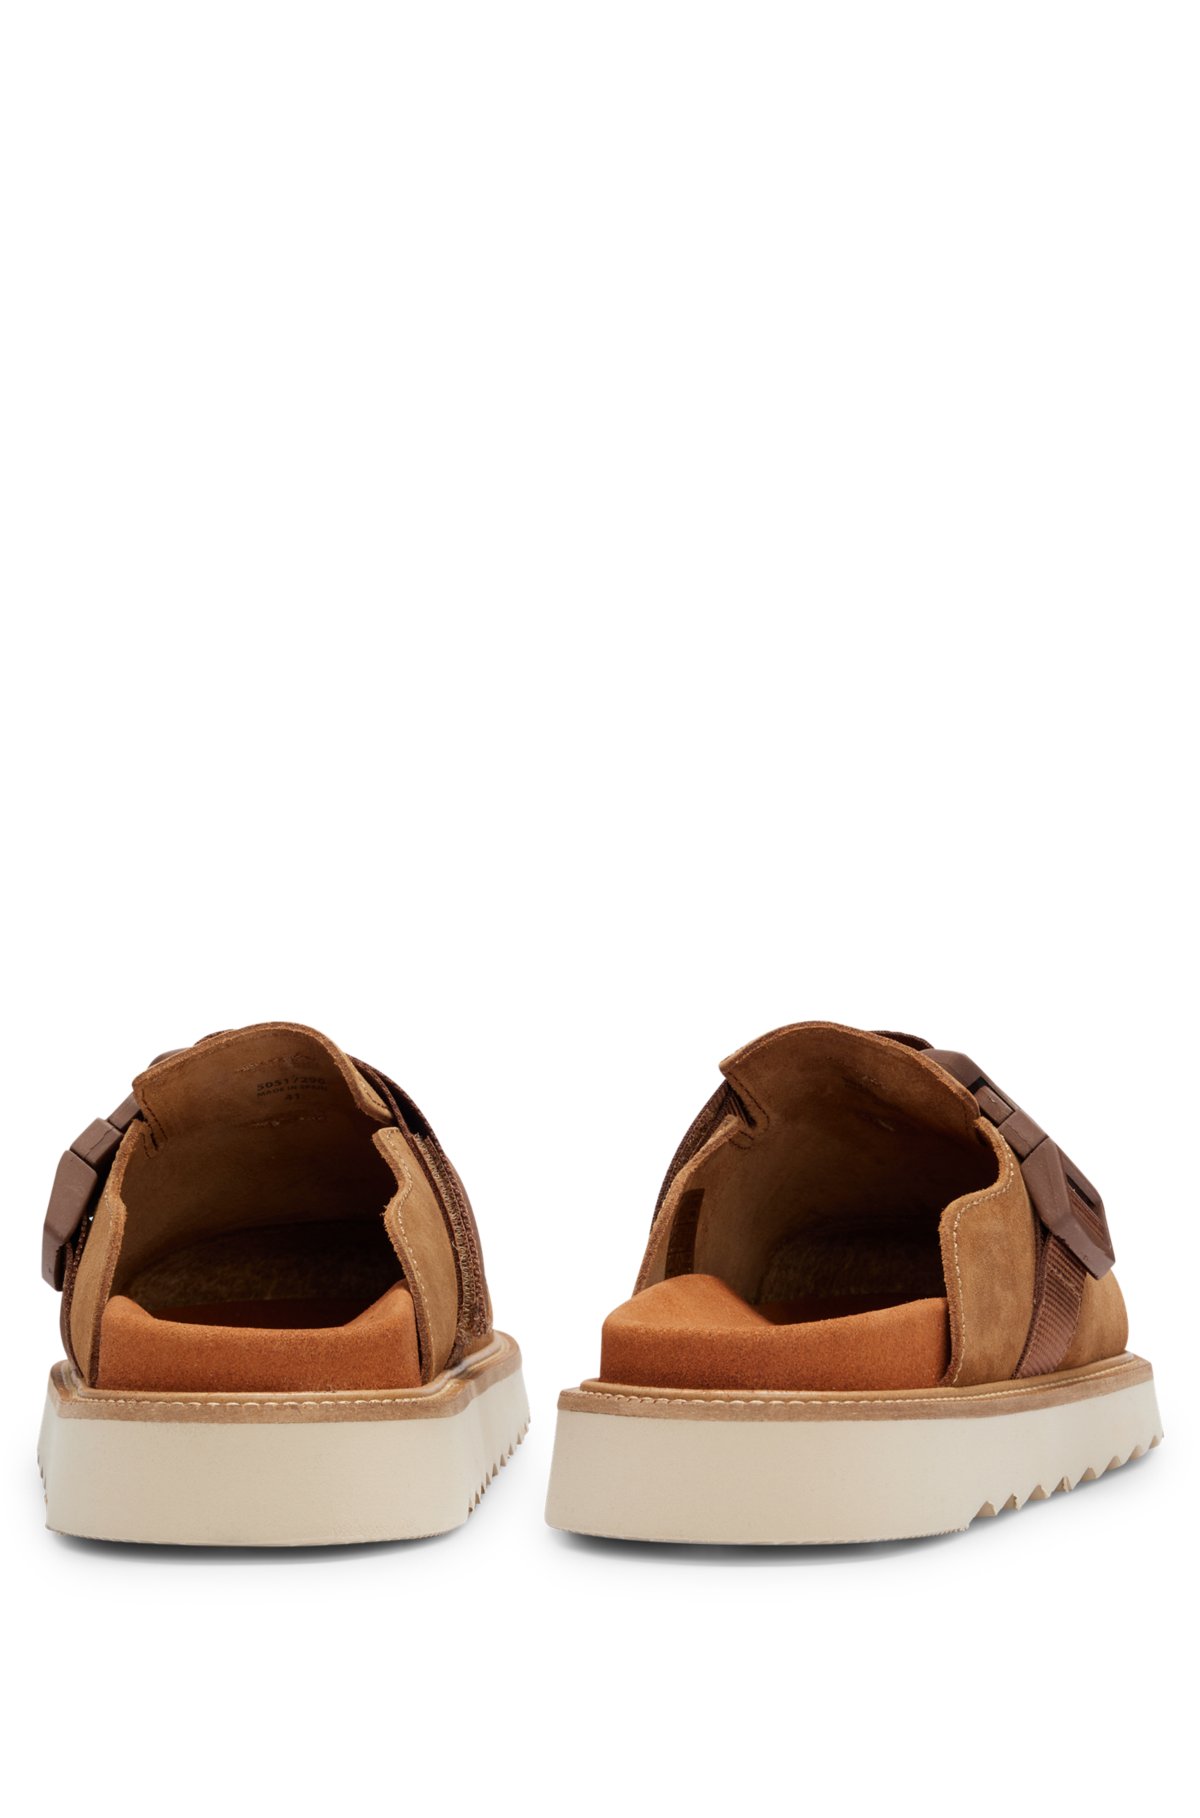 Suede slip-on shoes with buckled strap, Brown